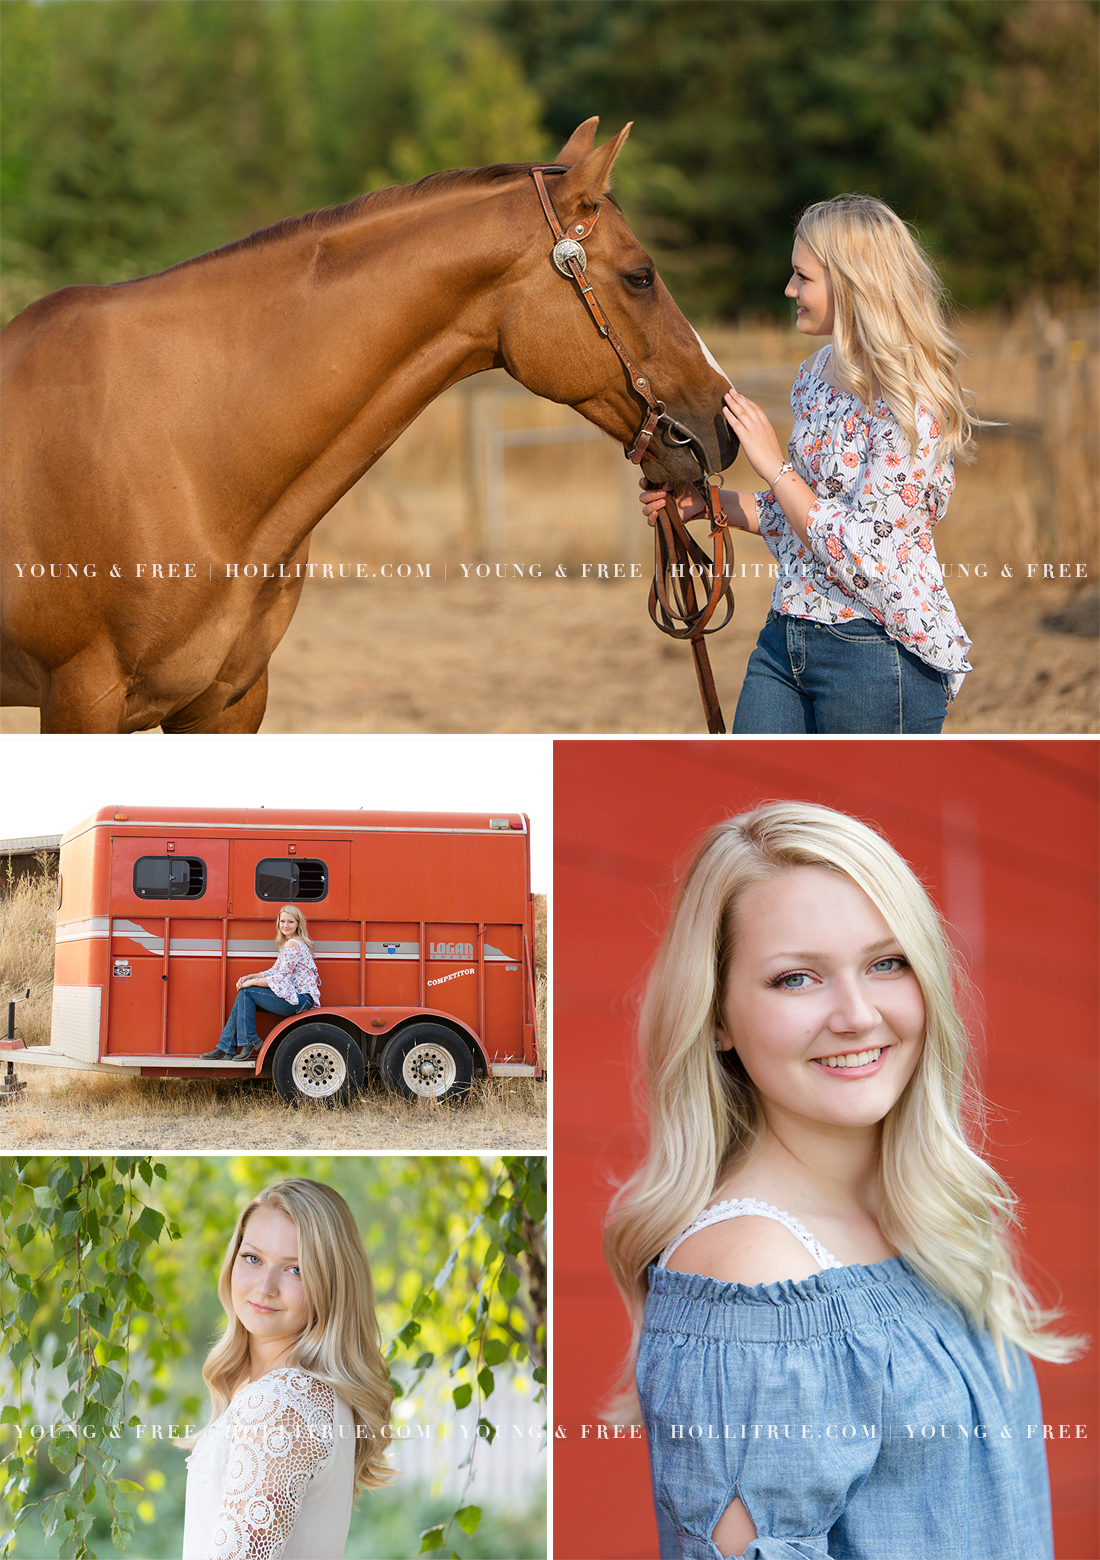 Rustic Senior Portrait Session with a horse in a Natural Park in Corvallis, Oregon by Senior Portrait Photographer, Holli True